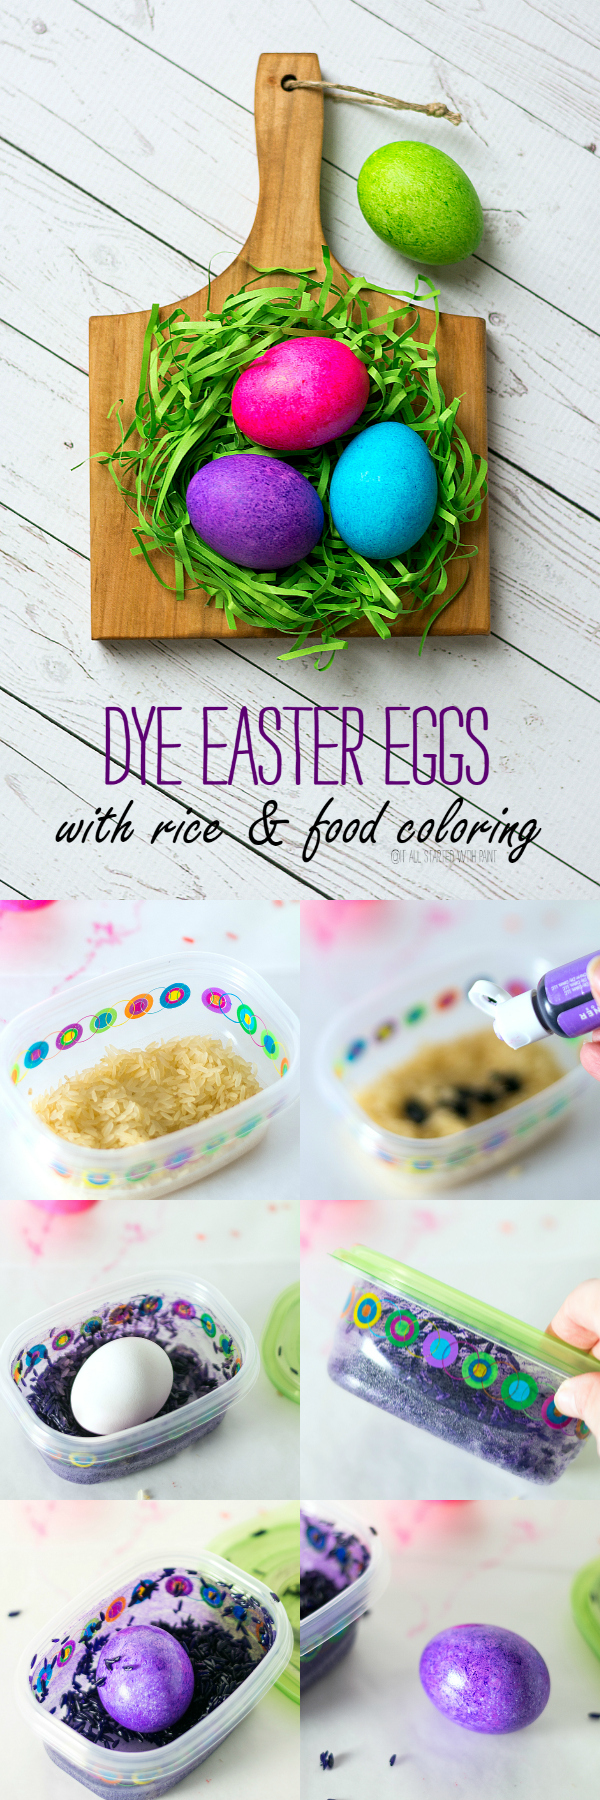 Dye Easter Eggs With Rice Food Coloring It All Started With Paint,Mimosa Recipes For Bridal Shower